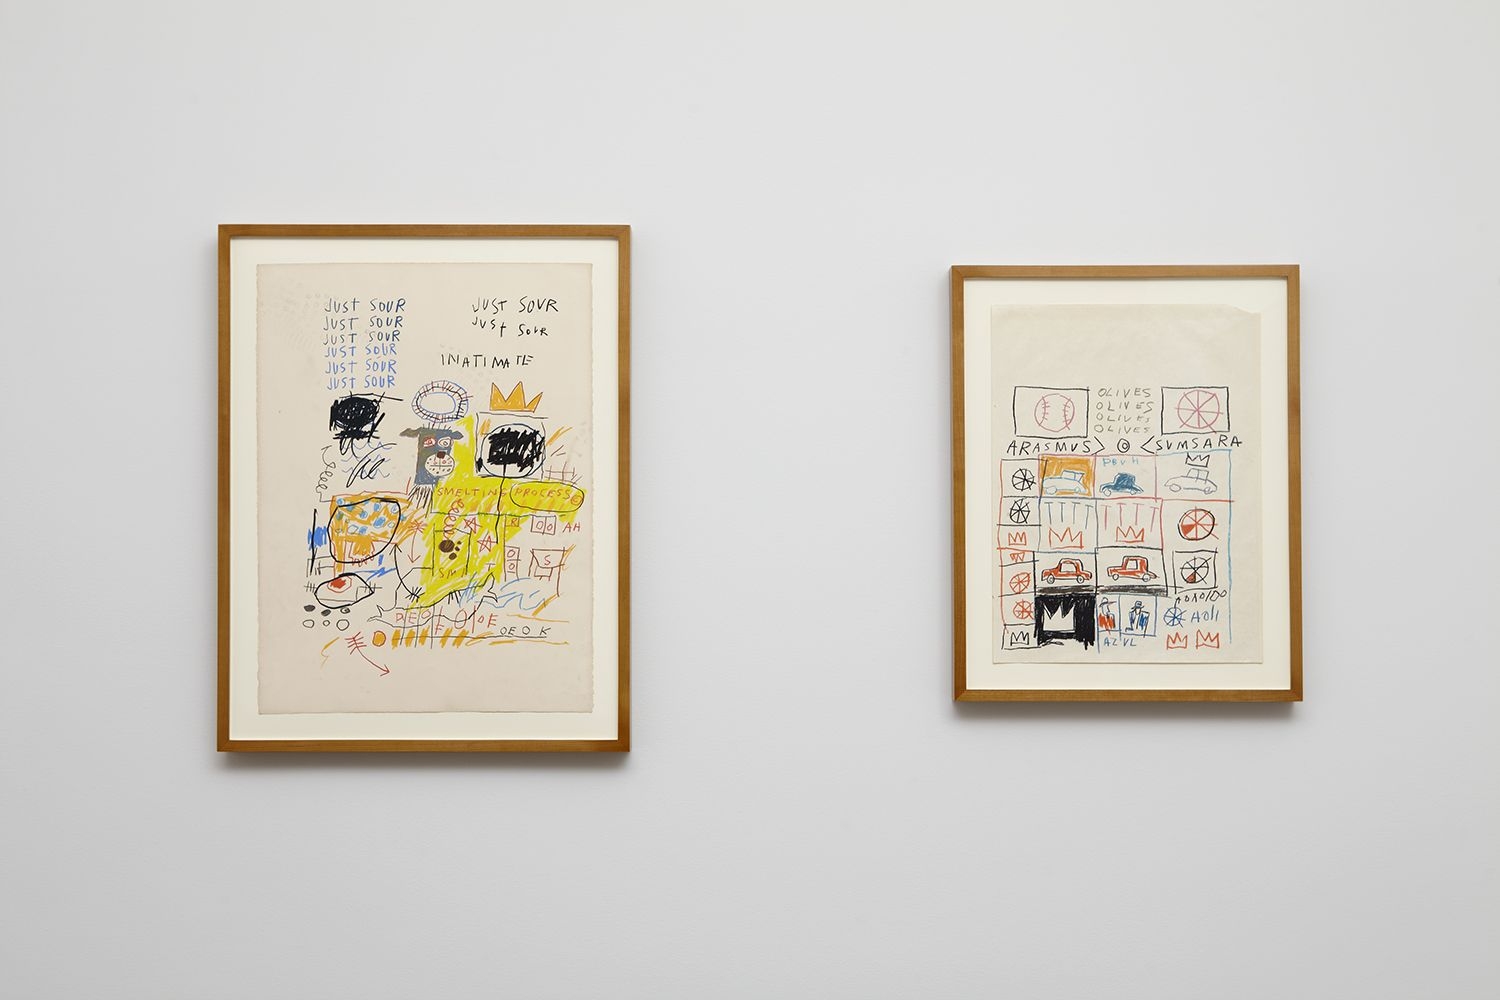 Installation view of&nbsp;Jean-Michel Basquiat Drawing: Work from the Schorr Family Collection,&nbsp;April 30&ndash;June 12, 2014., &copy; Estate of Jean-Michel Basquiat. Licensed by Artestar, New York.&nbsp;